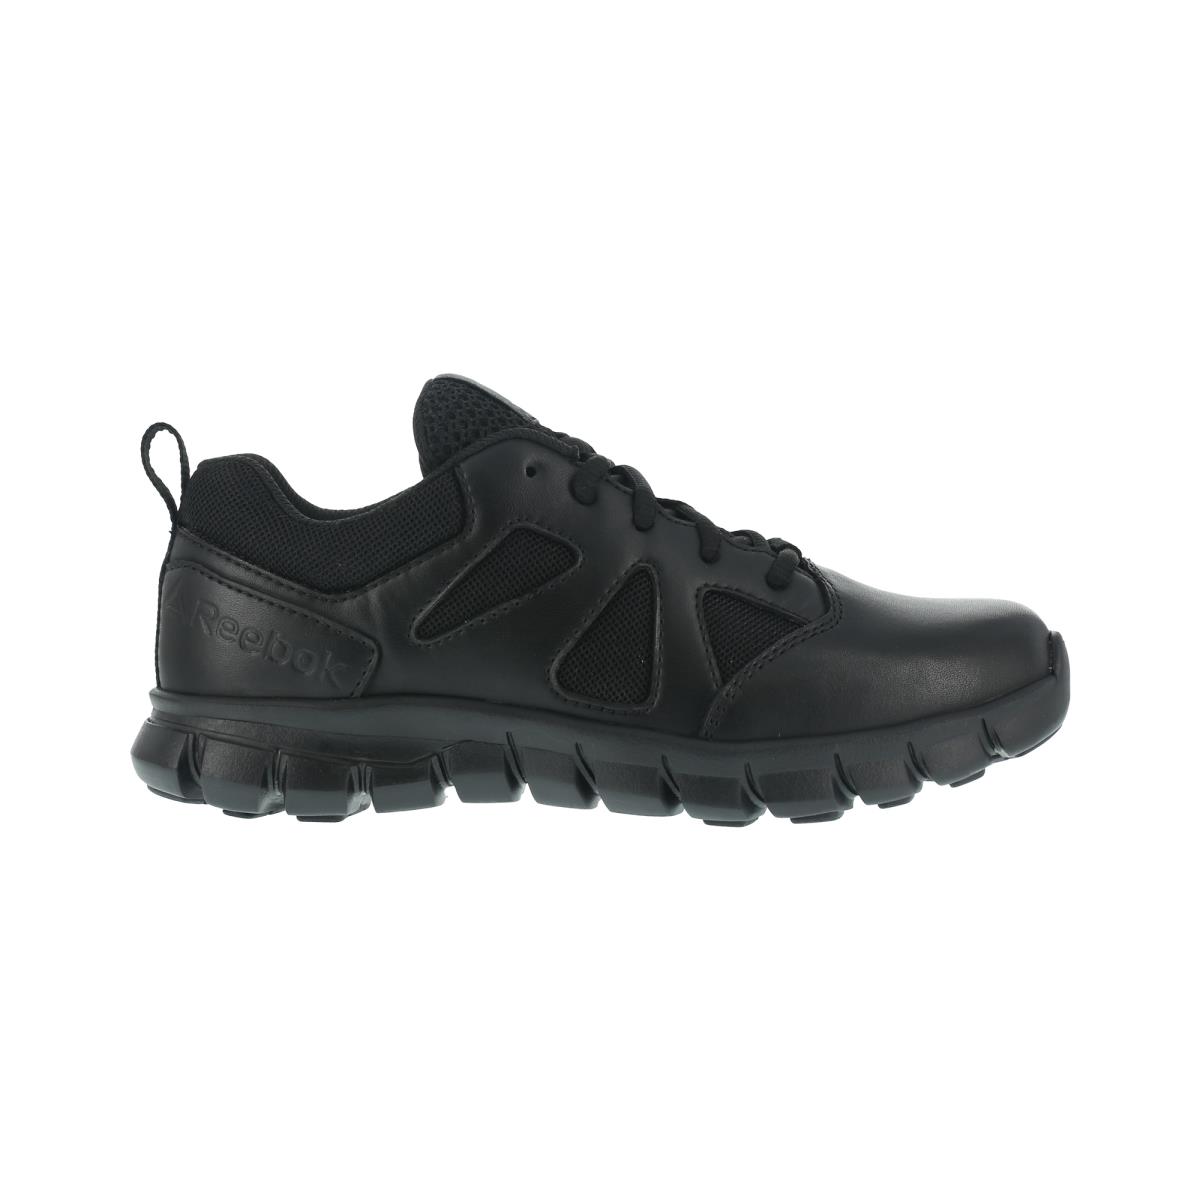 Reebok Womens Black Leather Work Shoes Sublite Tactical M